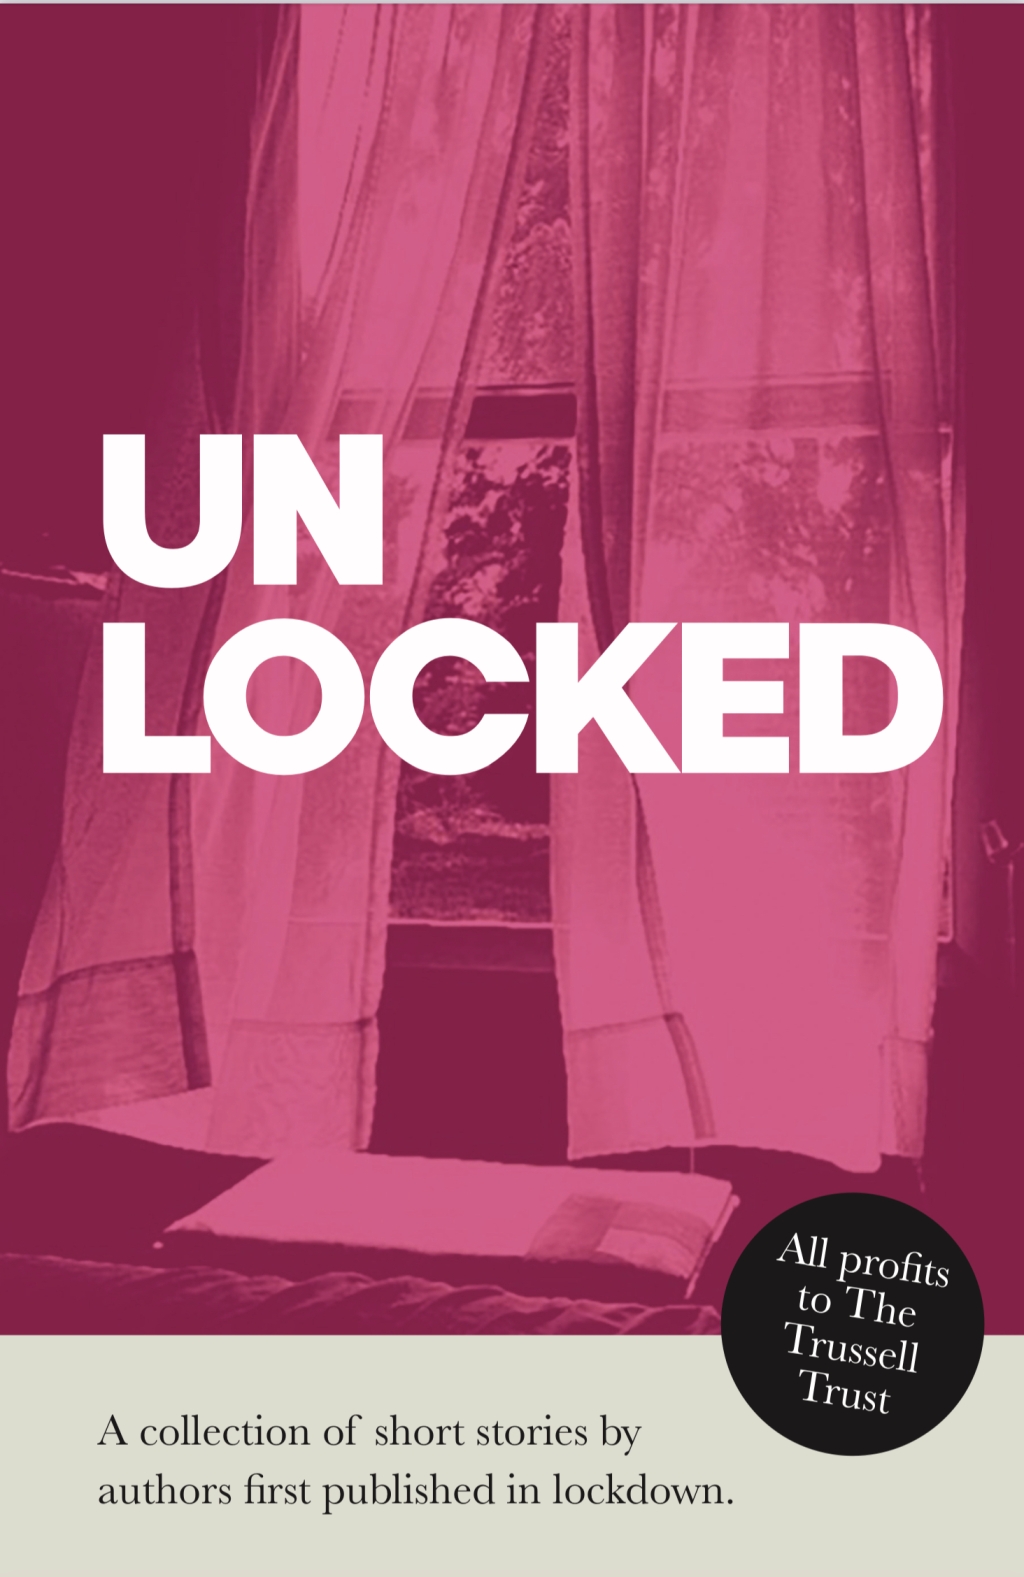 UnLocked: A captivating collection of short stories from the D20 Authors @TheD20Authors@lovebookstours #unlocked